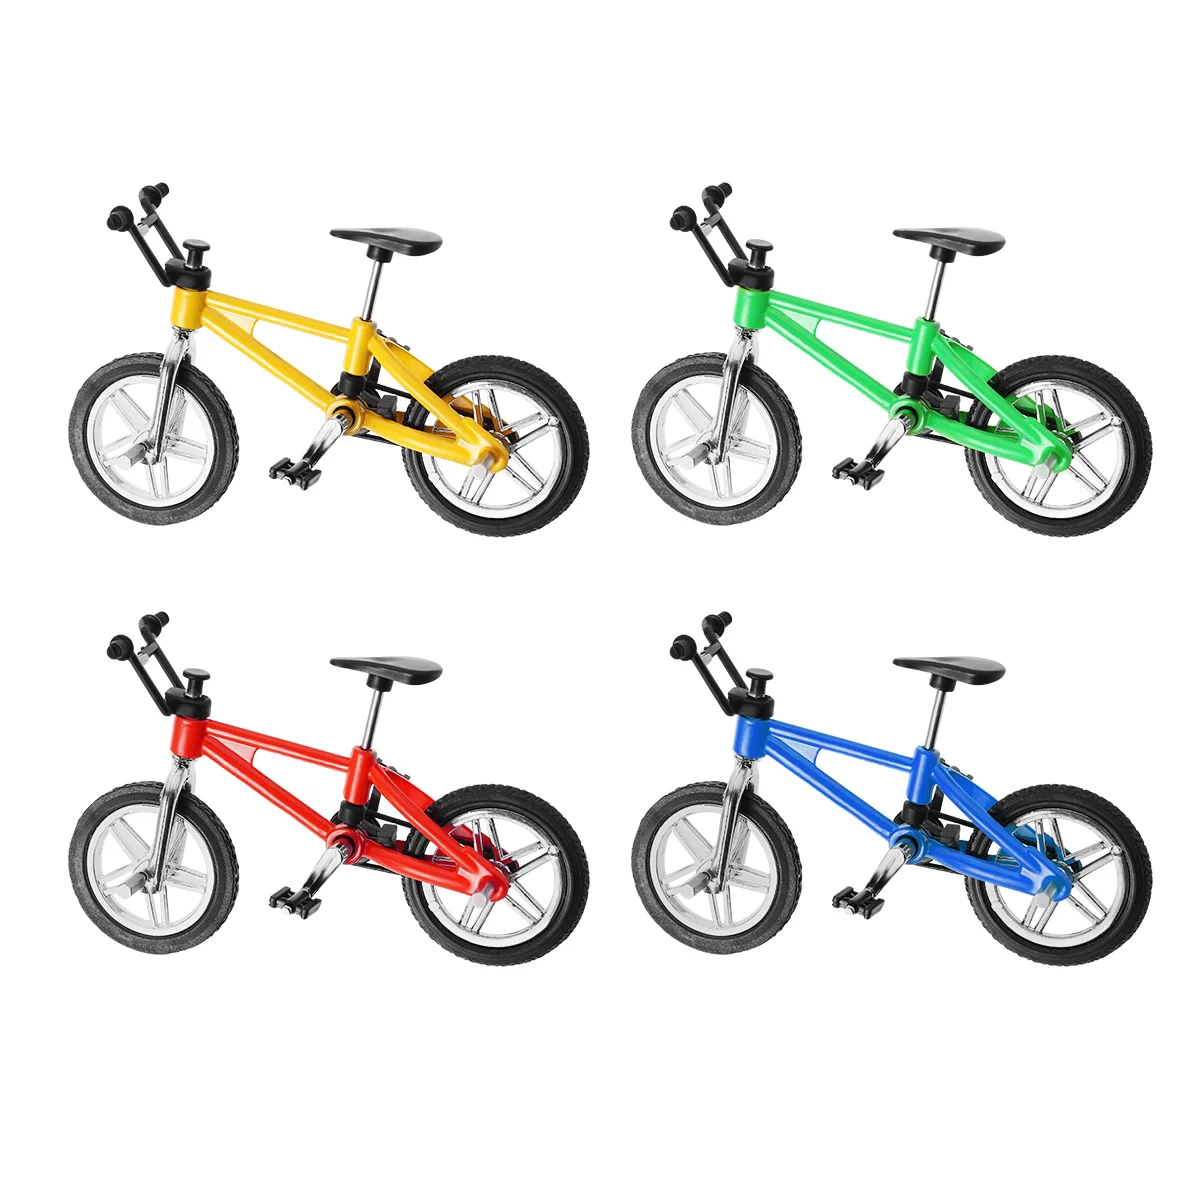 

Bike Finger Toy Mini Miniature Mountain Toys Favors Game Bikes Collections Ornament Metal Boy Gifts